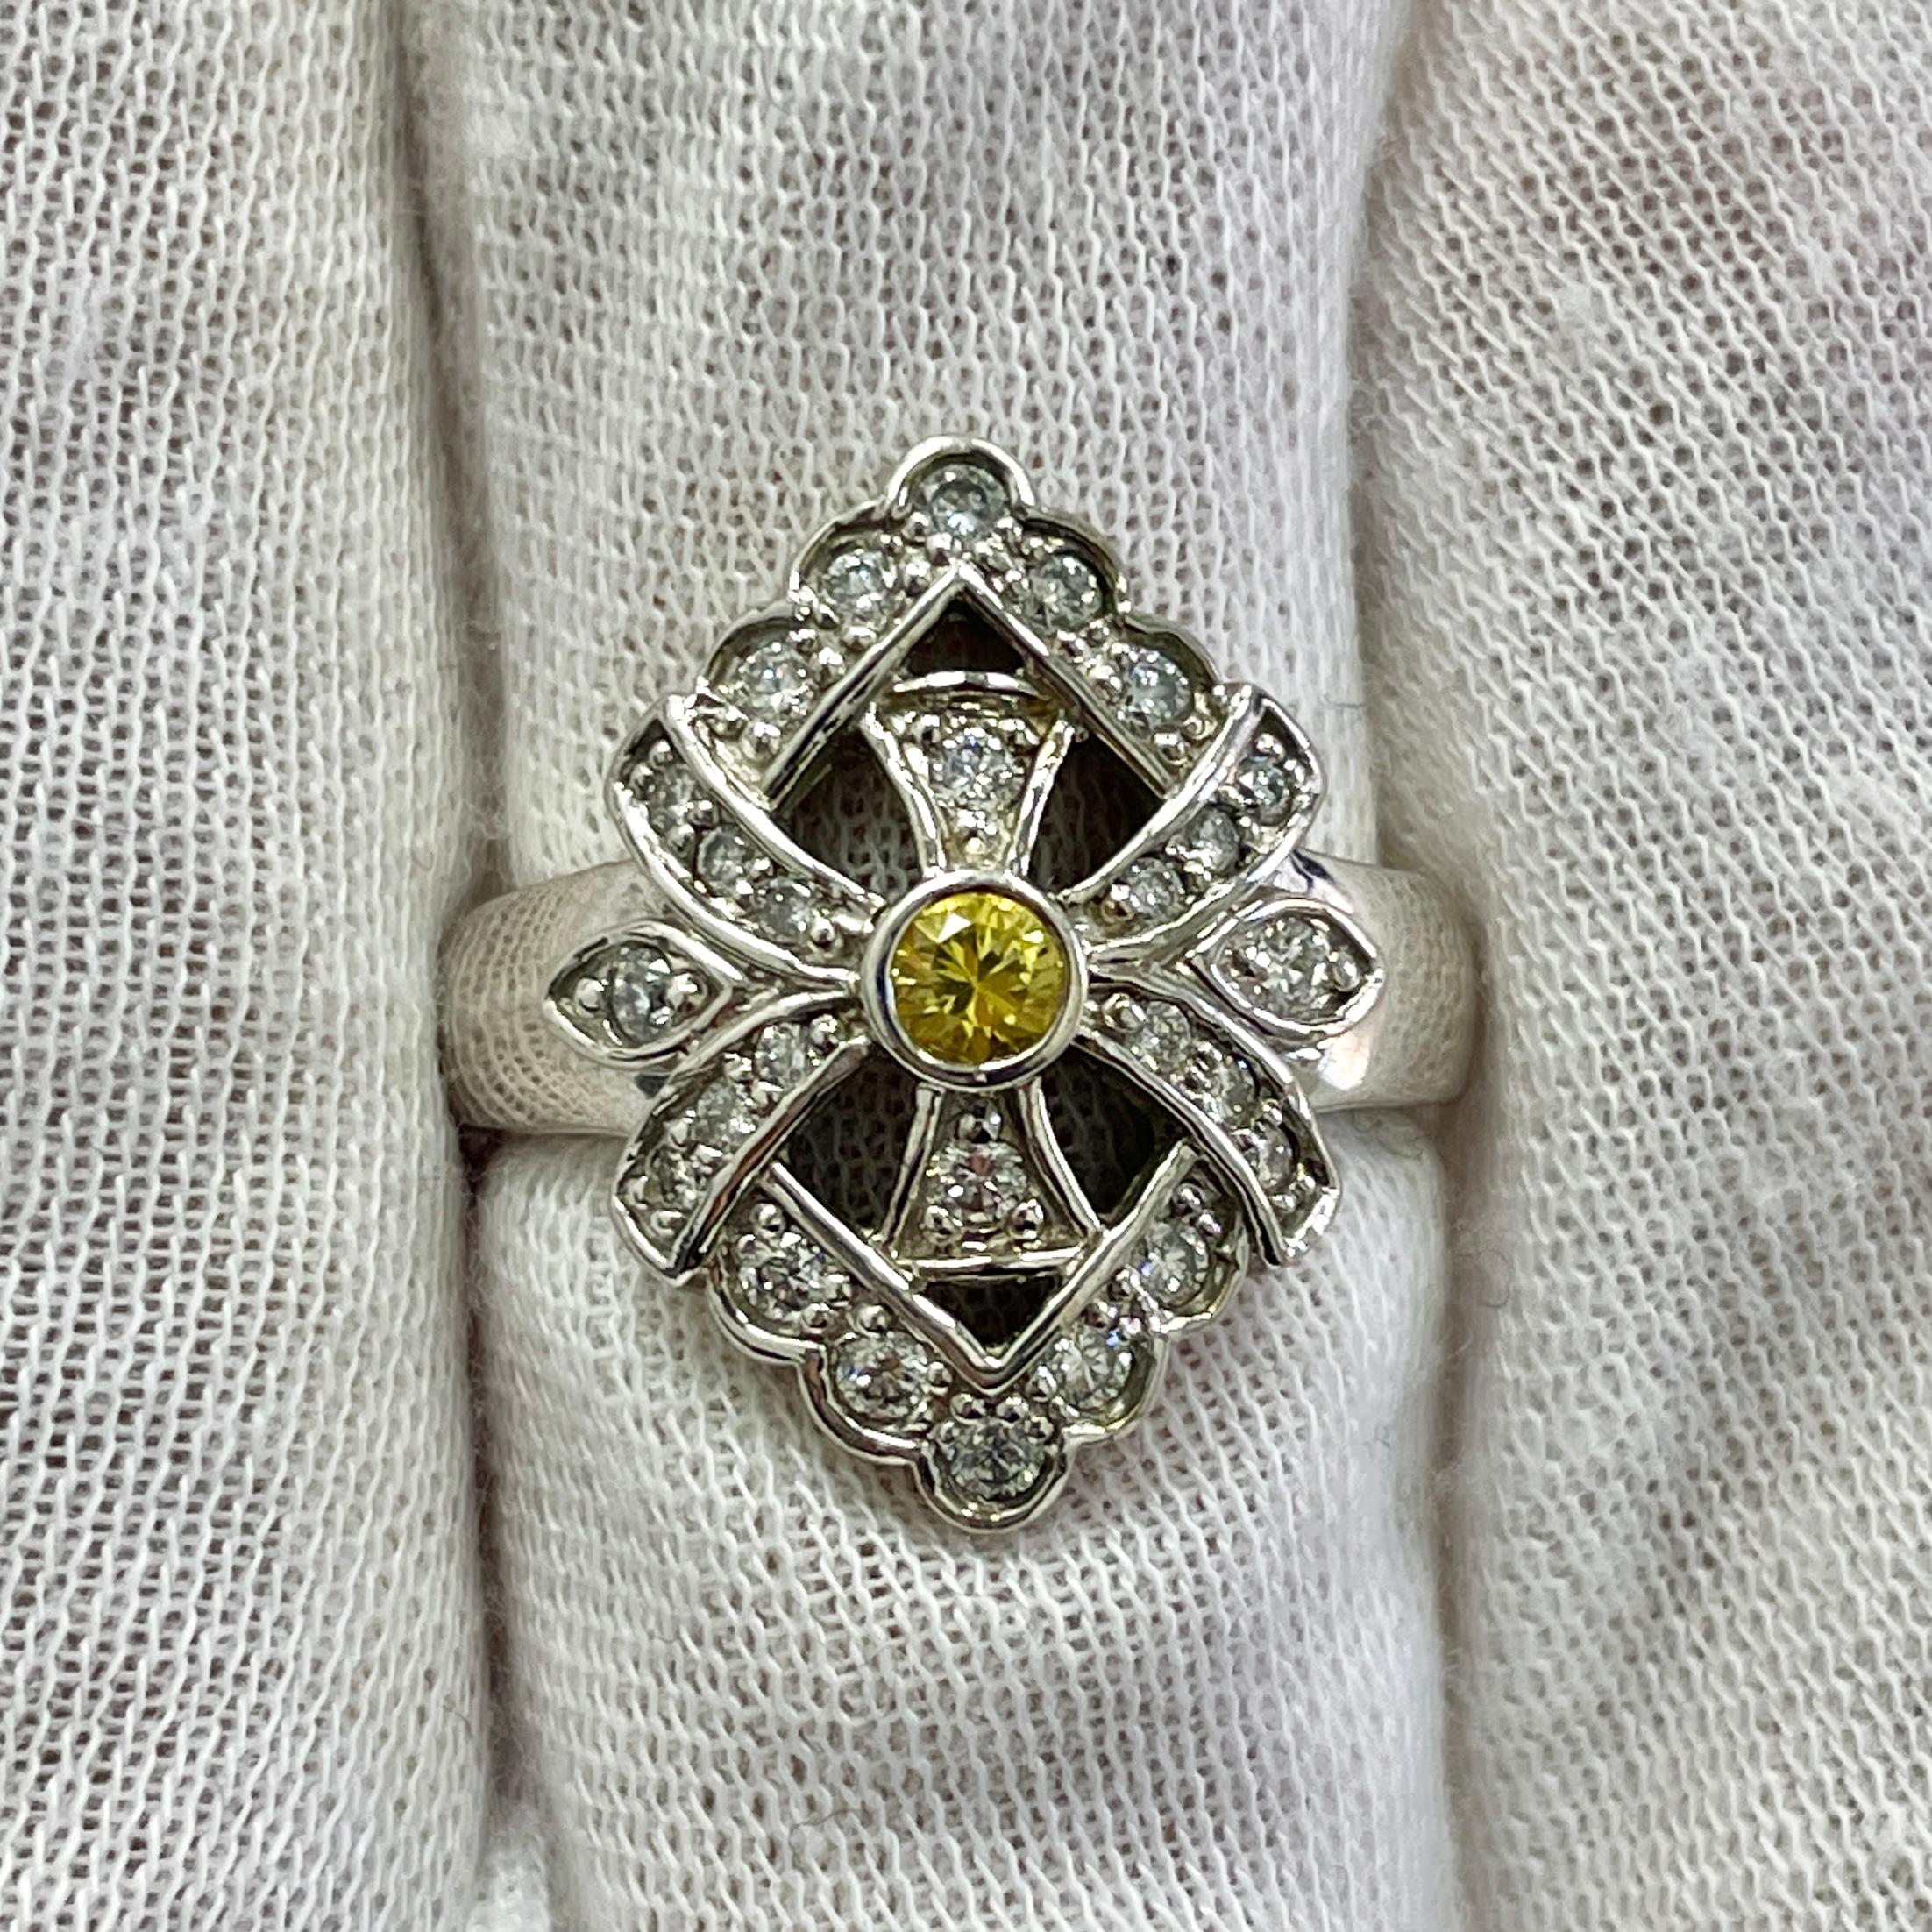 This is a round, sunny yellow sapphire mounted in a 14K white gold ring with 0.46Ct of brilliant white diamonds. Suitable for any occasion!